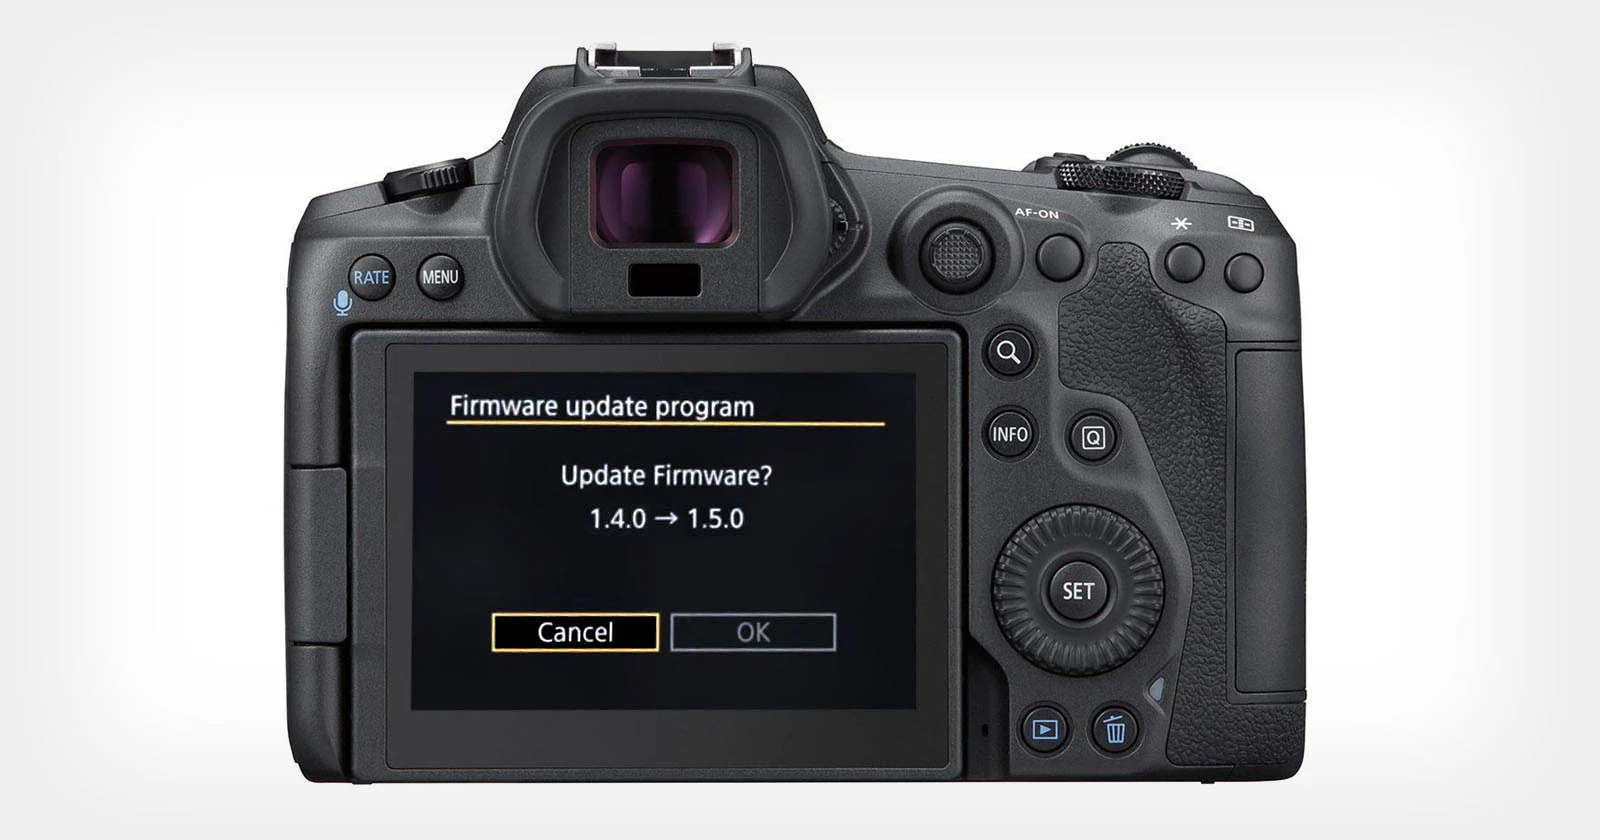 Why Is Firmware Important In Digital Cameras?